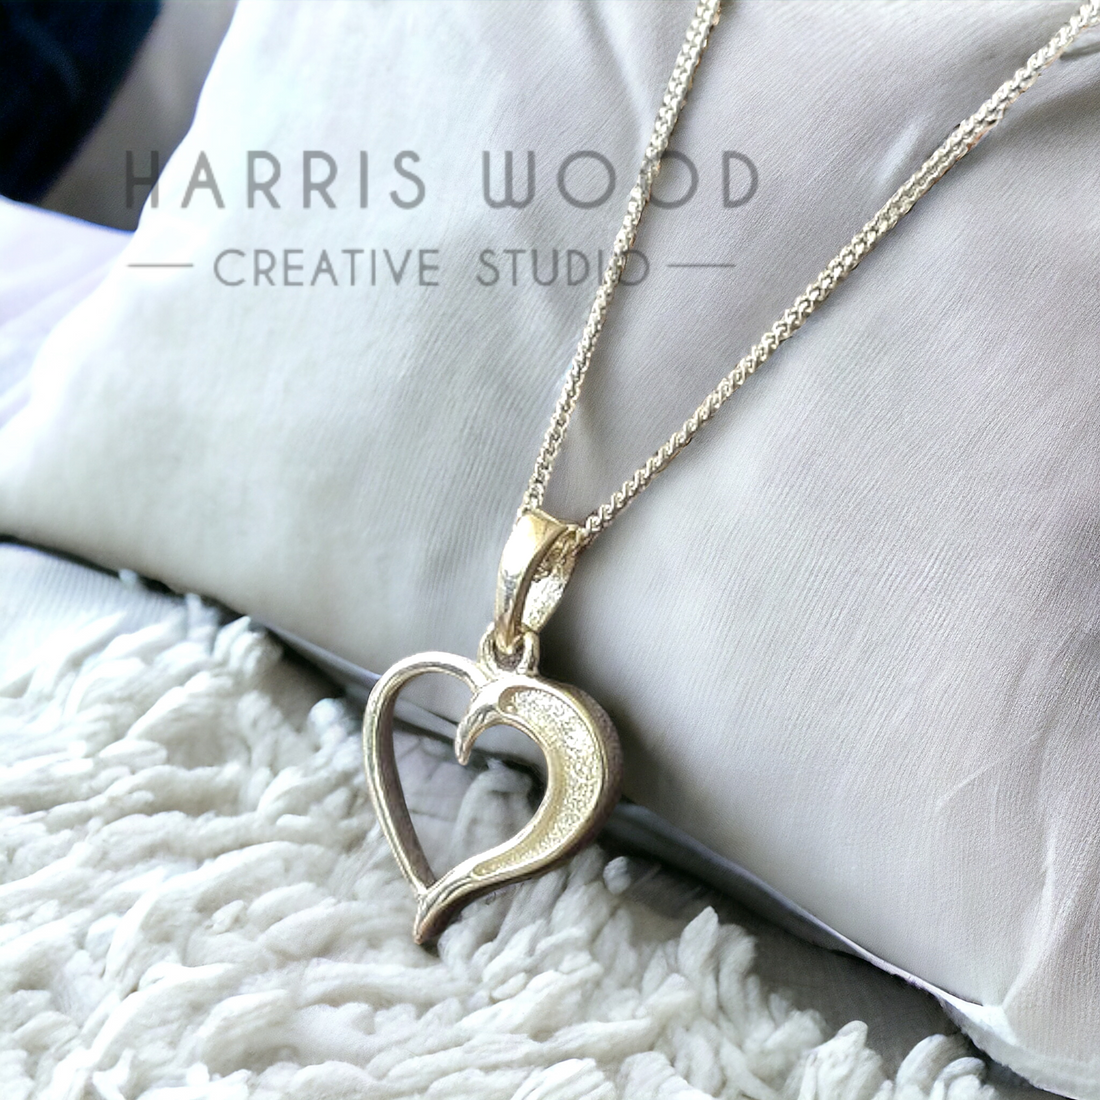 Hollow Heart Solid Silver Setting Pendant